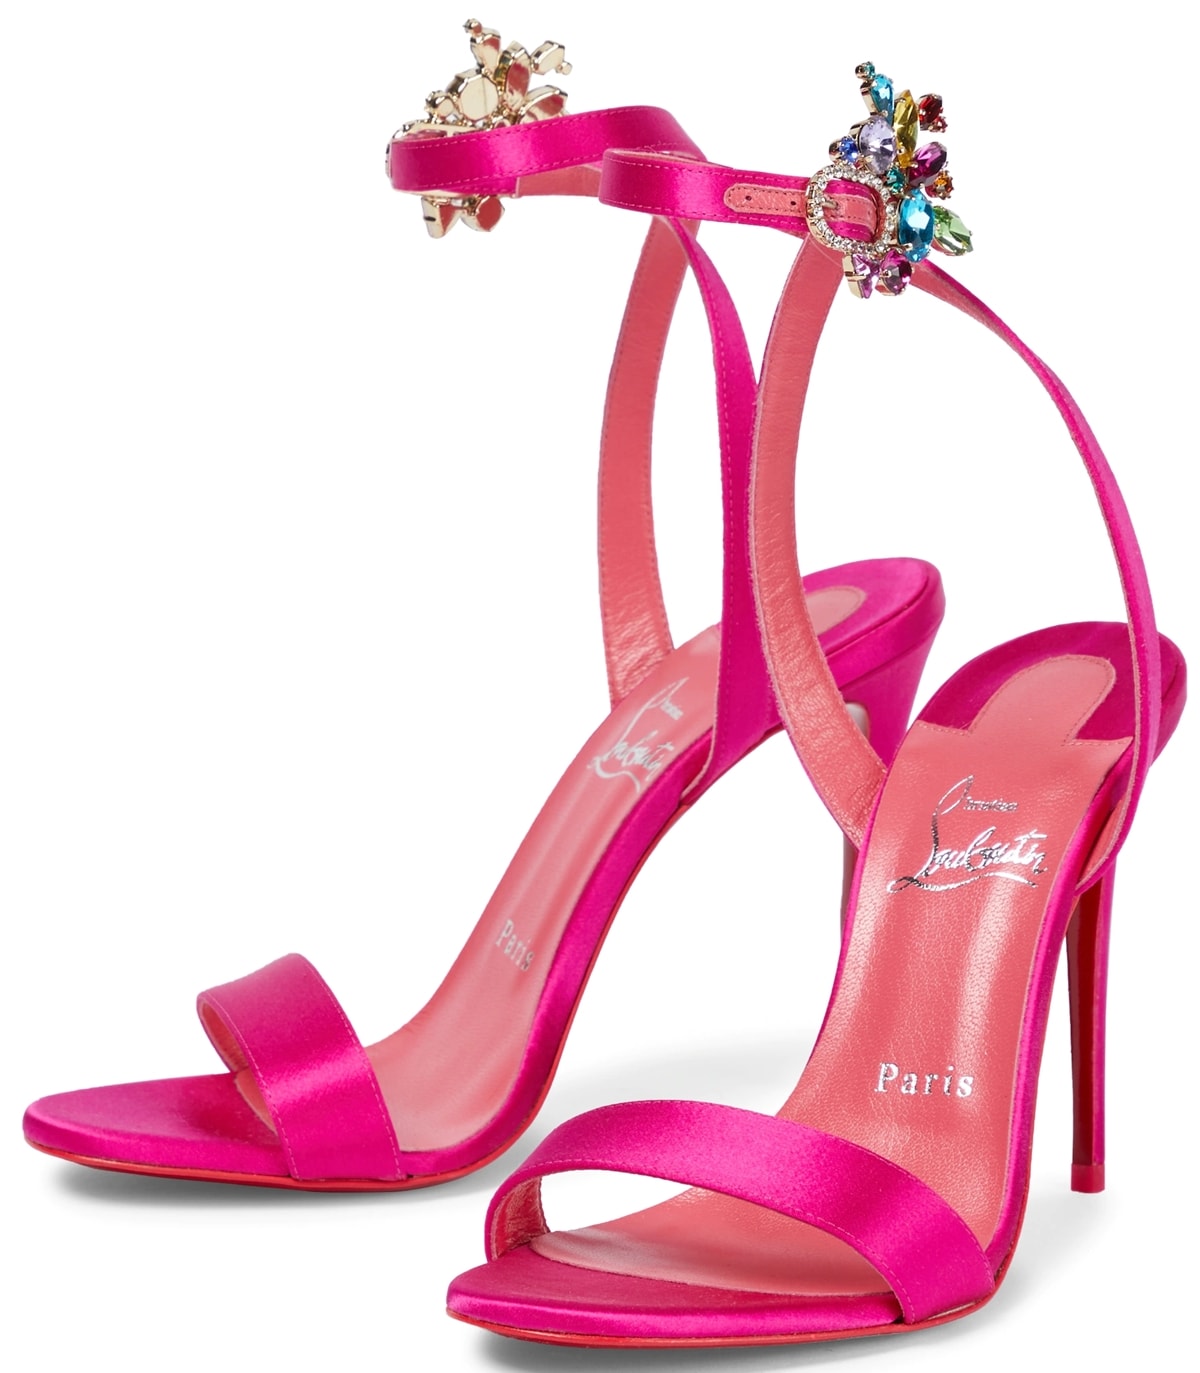 These pink satin Goldie Joli holiday party sandals feature 100mm high stiletto heels and crystal-adorned ankle straps